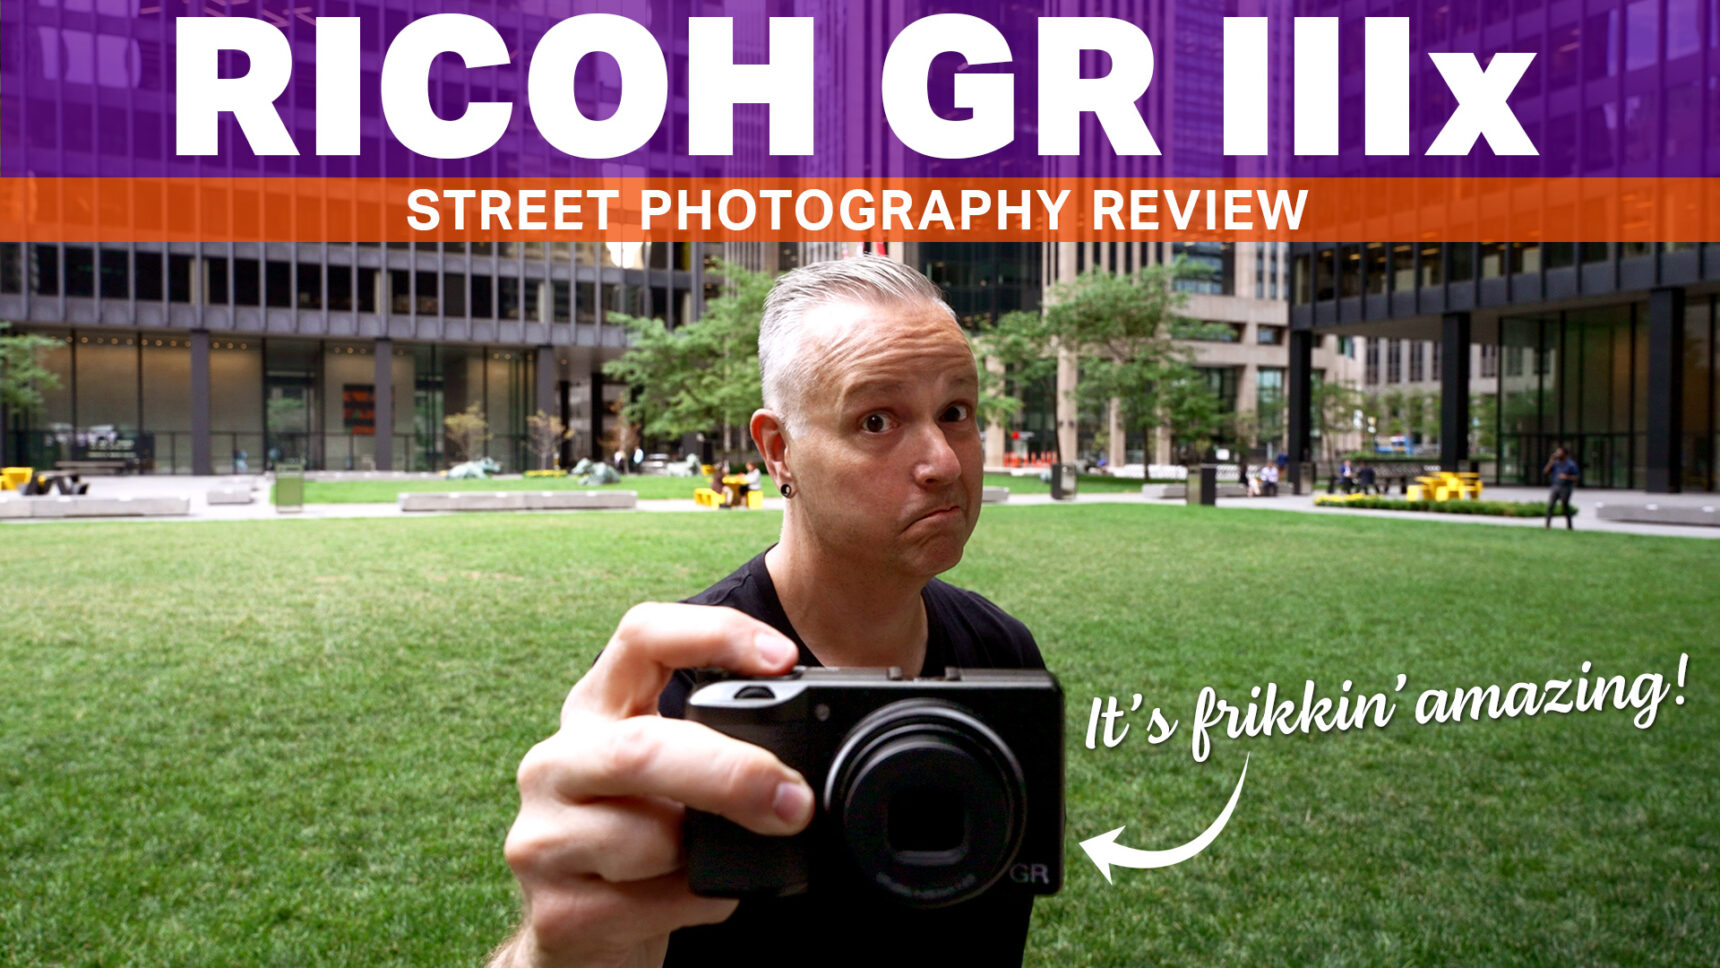 Ricoh GR IIIx Street Photography Review